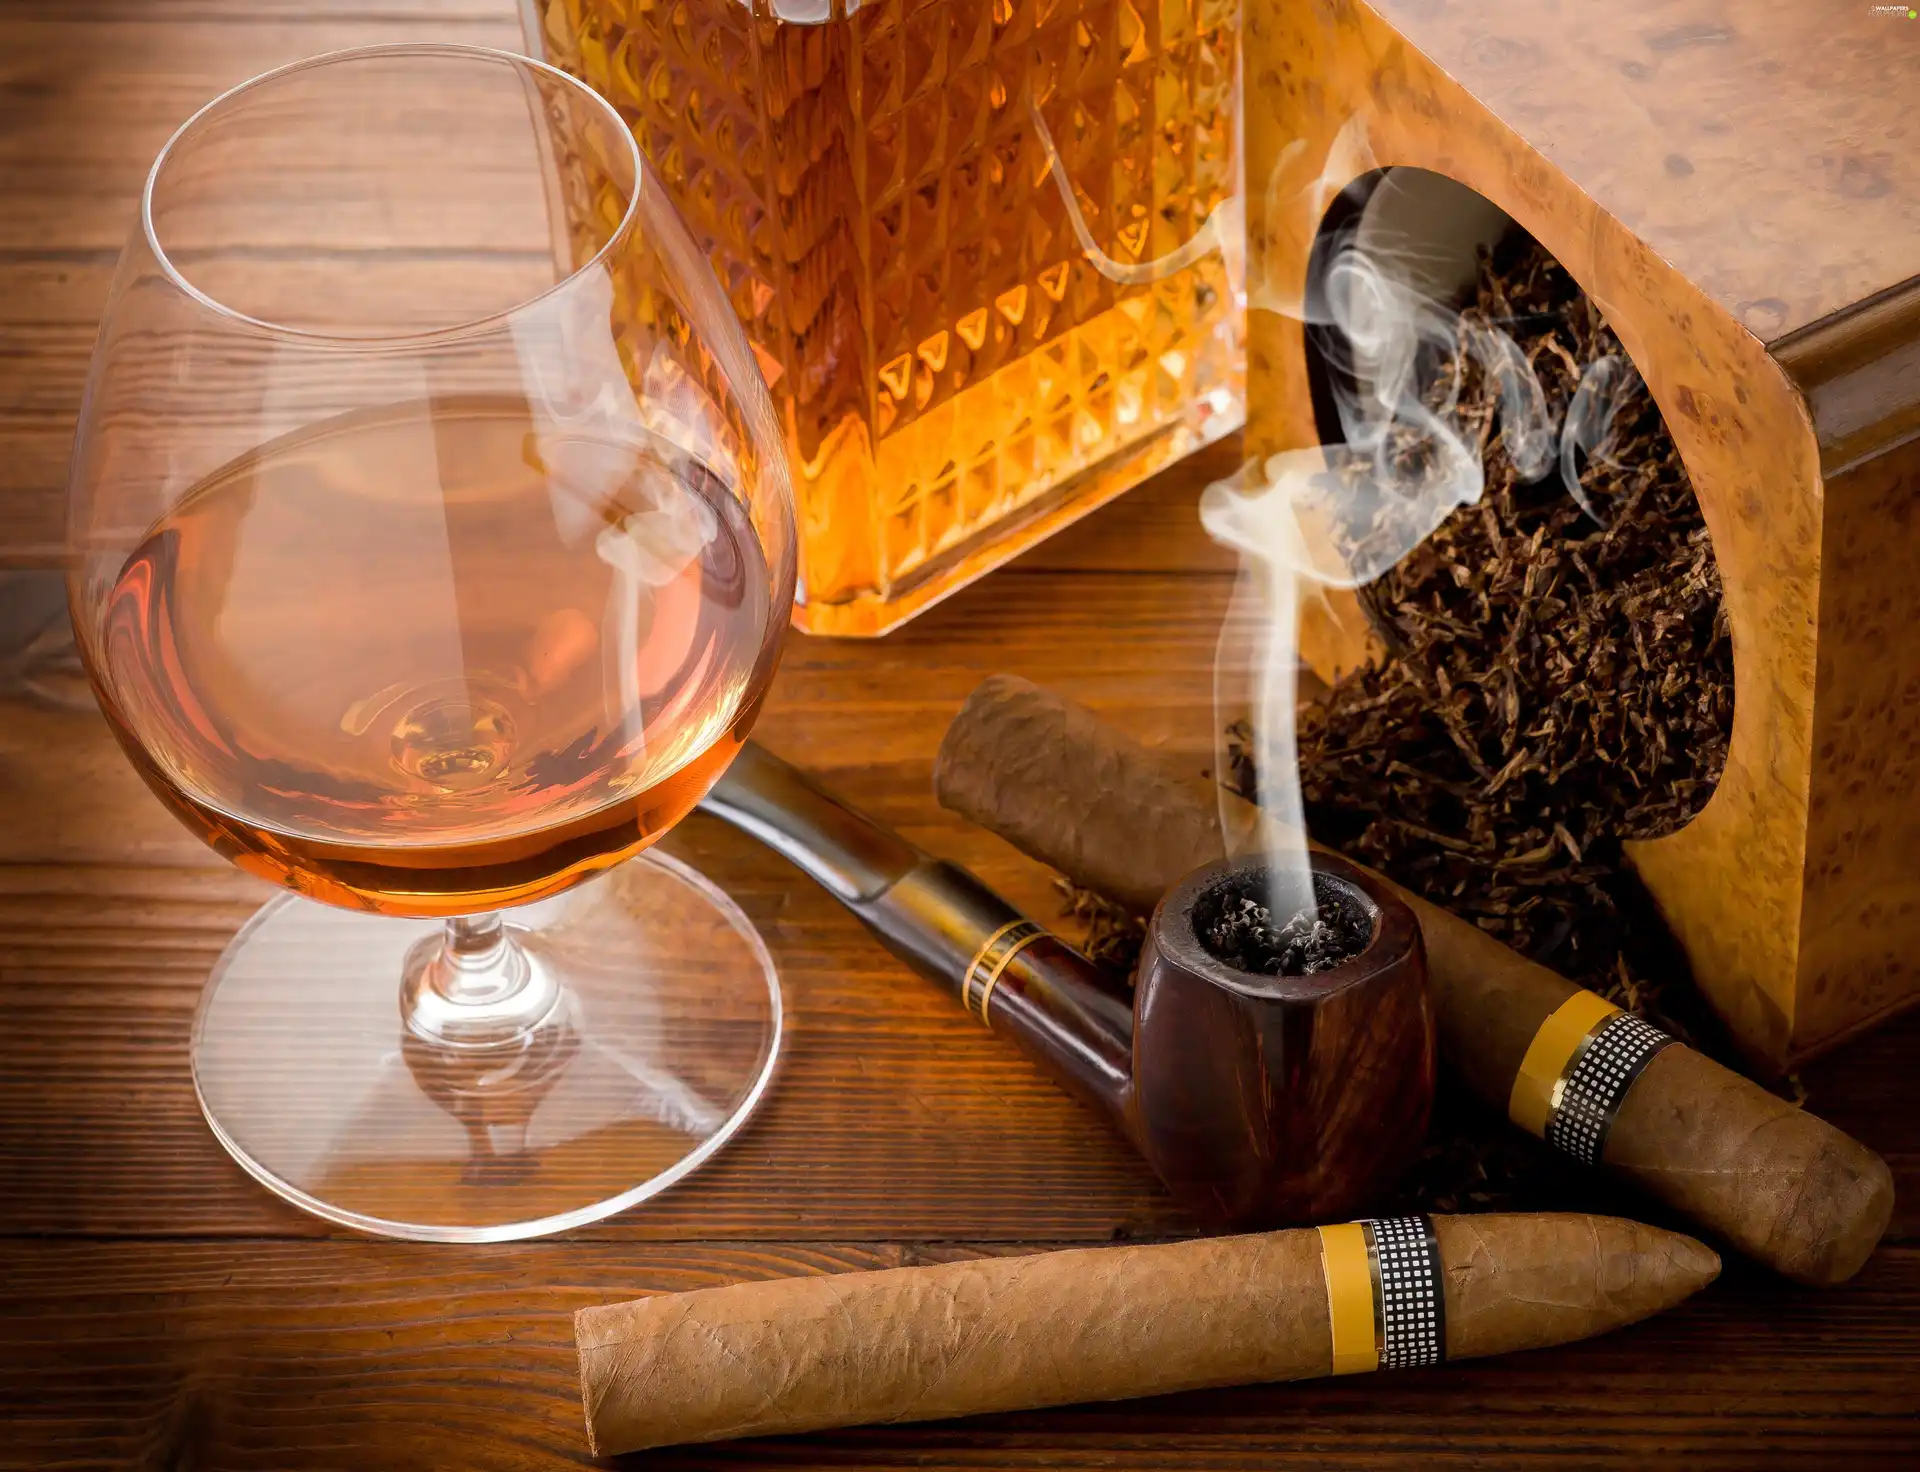 alcohol, pipe, Cigars, wine glass